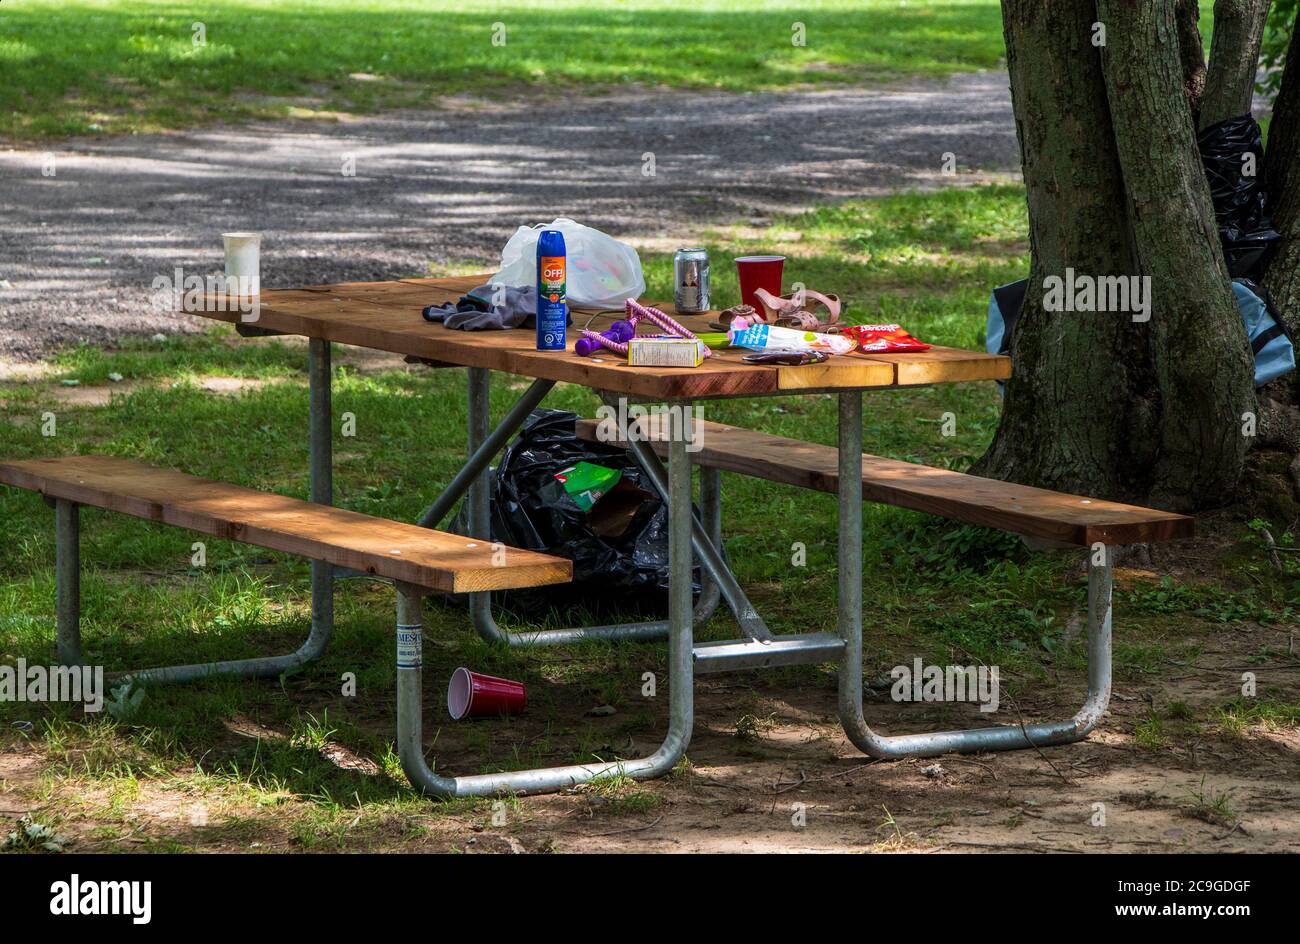 July 26, 2020- Roxton Falls, Qc, Canada: Rubbish let on a picnic table on a messy camping site, public park Stock Photo